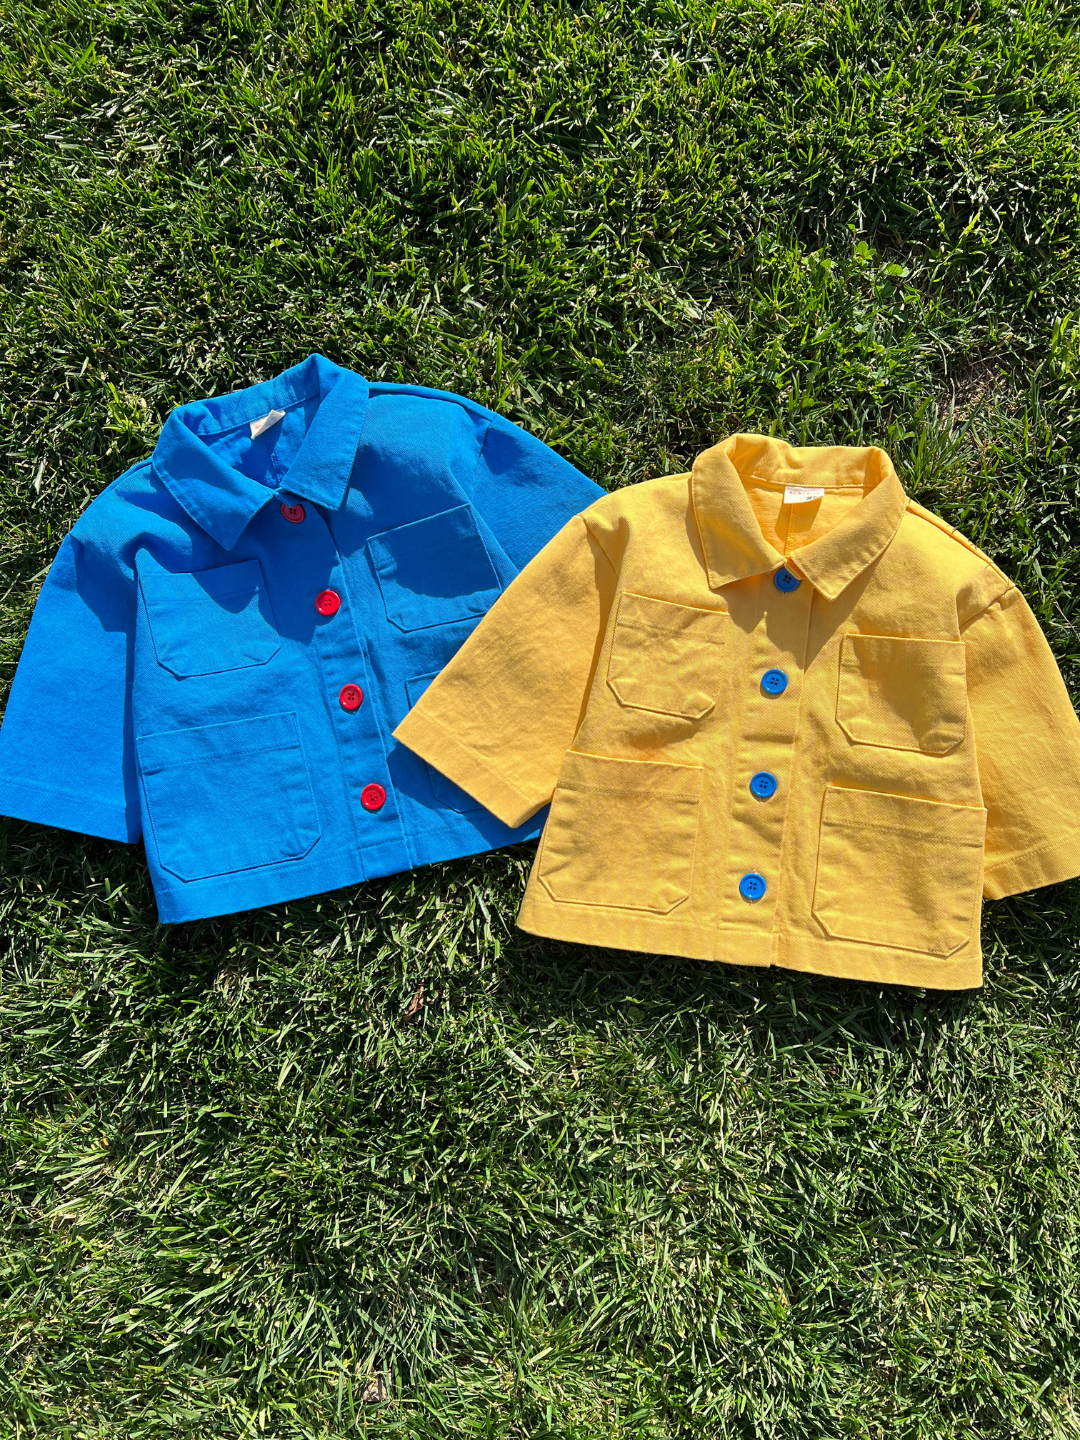 Two kids' jackets laid on grass; one in sky blue with four pockets and four orange buttons, one in yellow with four pockets and four blue buttons